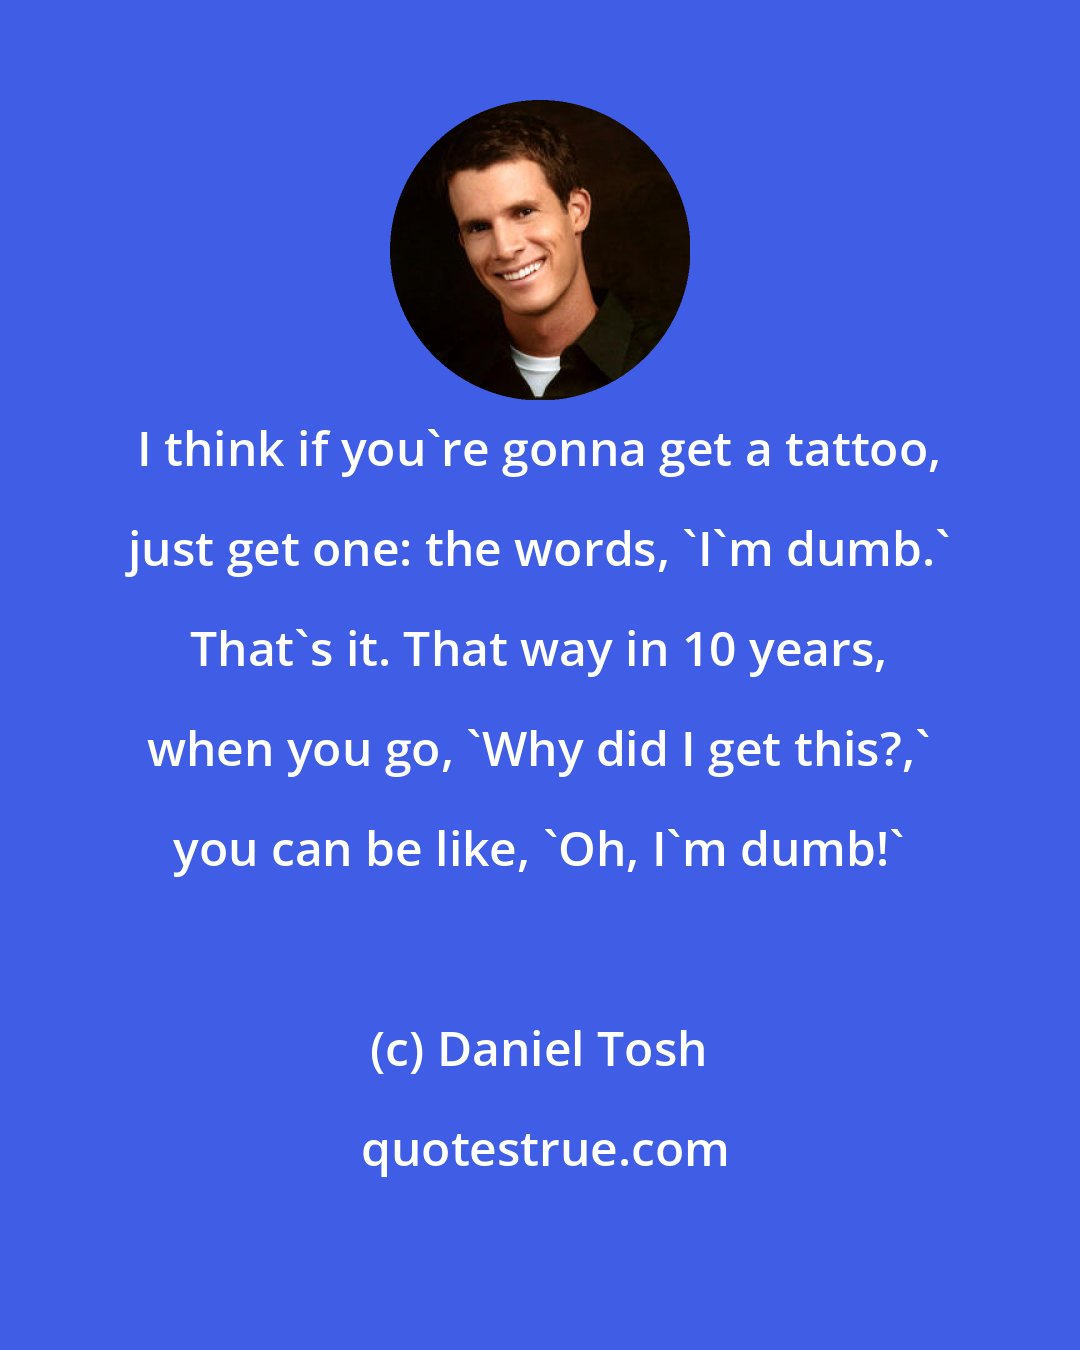 Daniel Tosh: I think if you're gonna get a tattoo, just get one: the words, 'I'm dumb.' That's it. That way in 10 years, when you go, 'Why did I get this?,' you can be like, 'Oh, I'm dumb!'